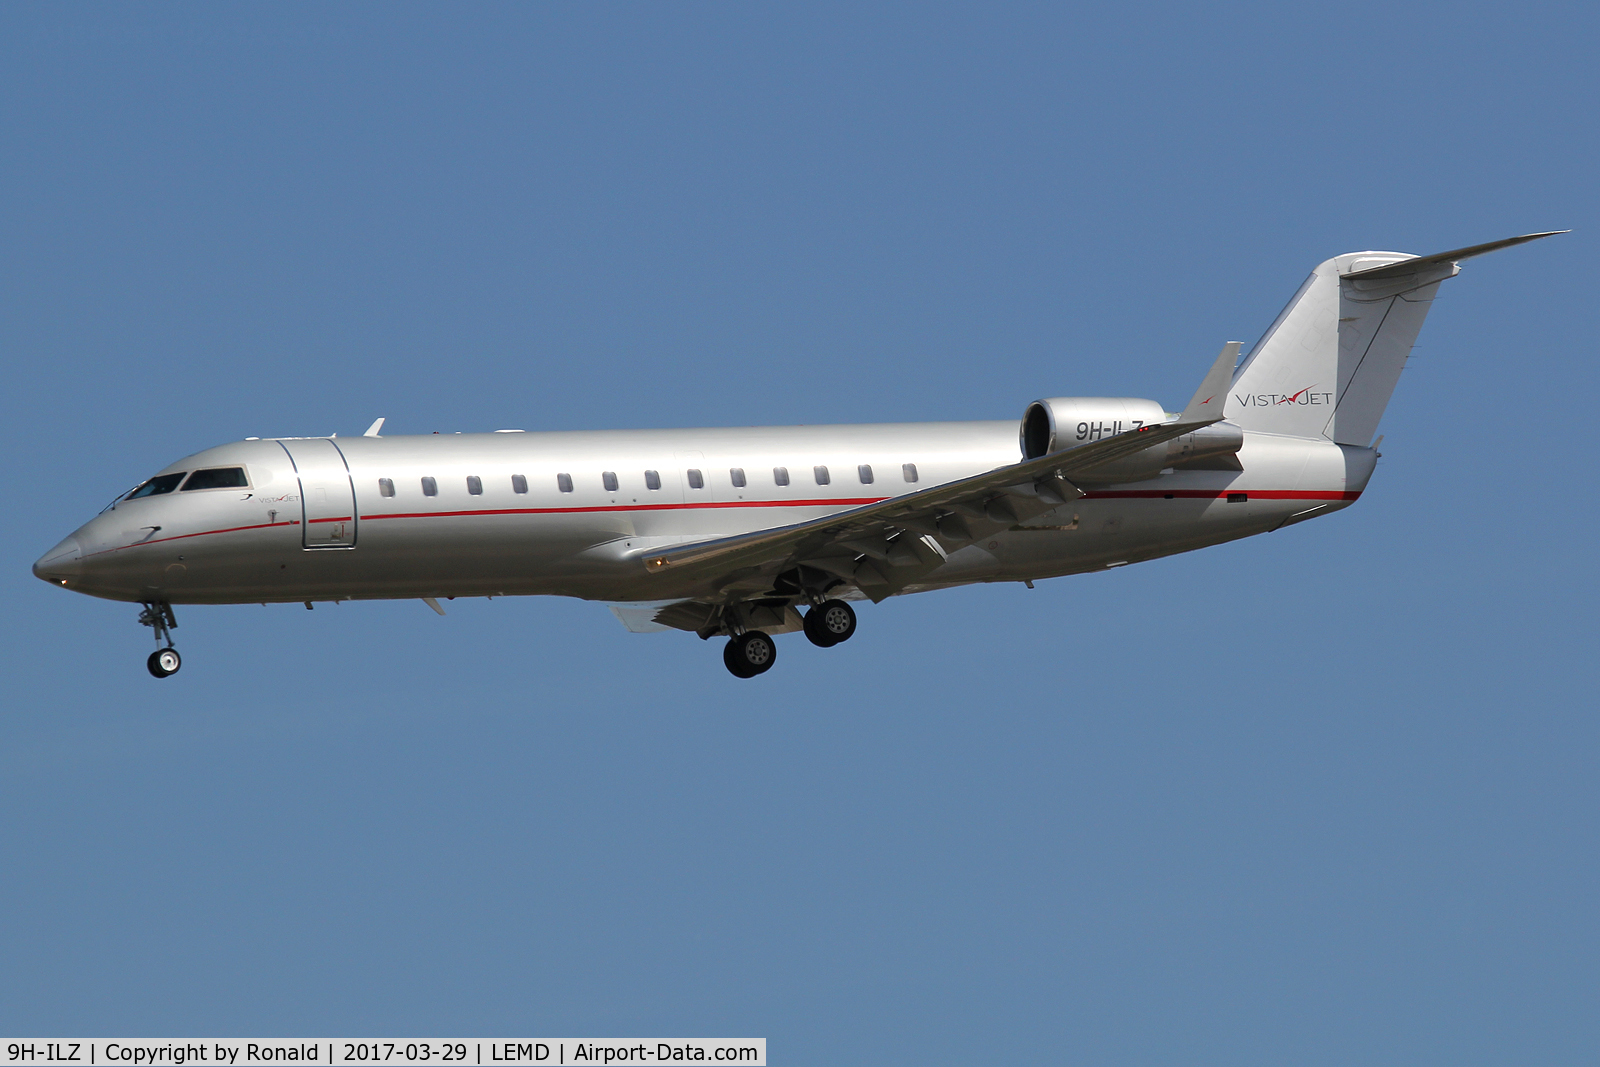 9H-ILZ, 2010 Bombardier Challenger 850 (CL-600-2B19) C/N 8086, at mad